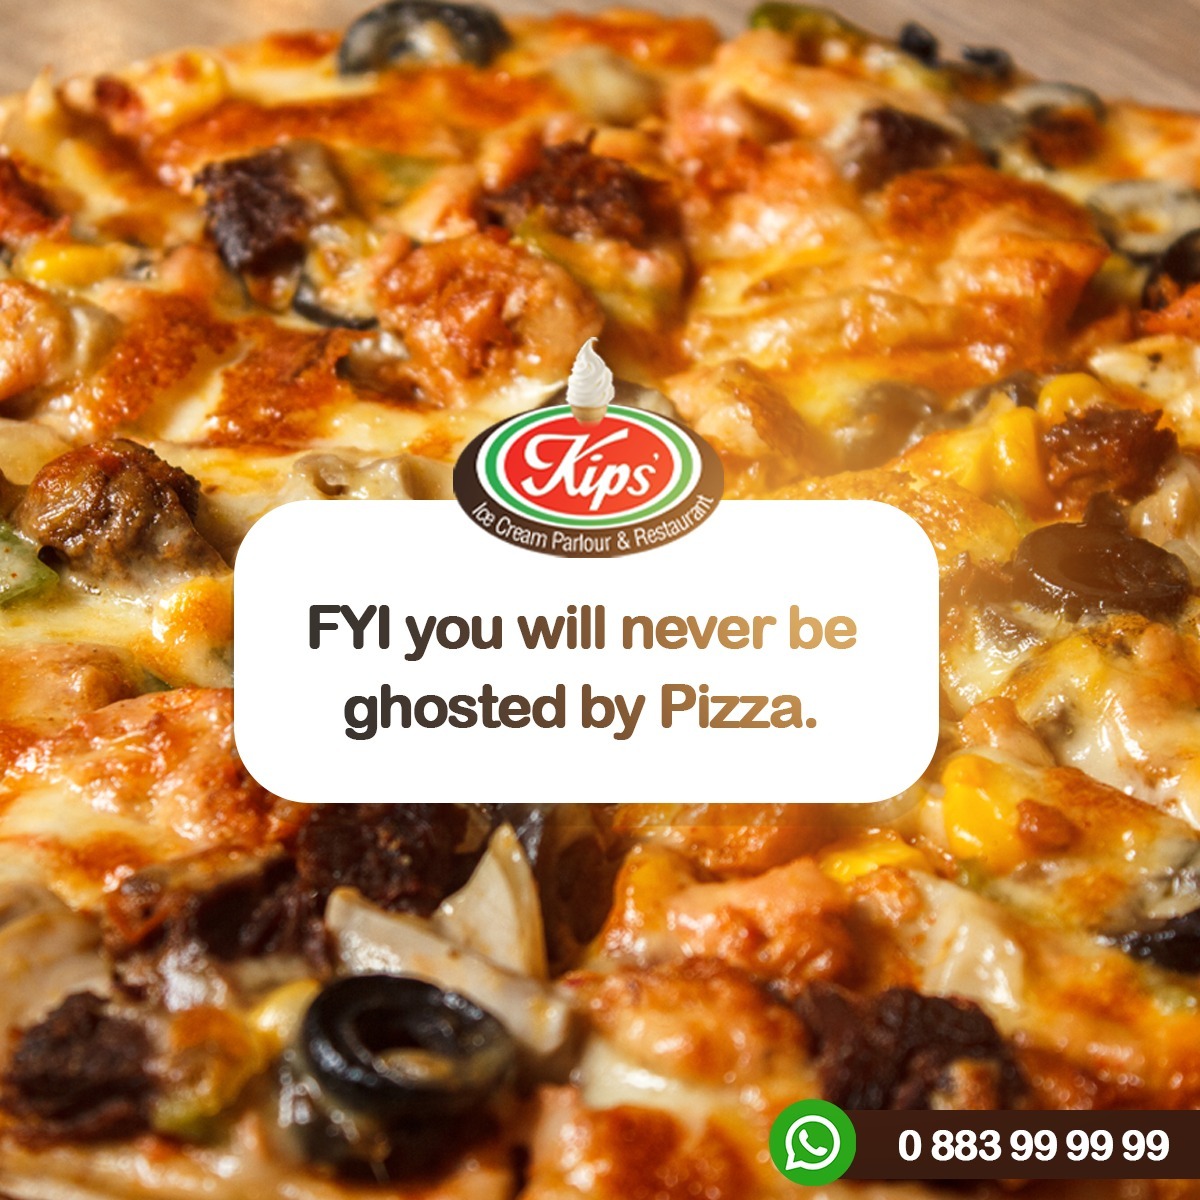 We are sure this Pizza will never Ghost ...